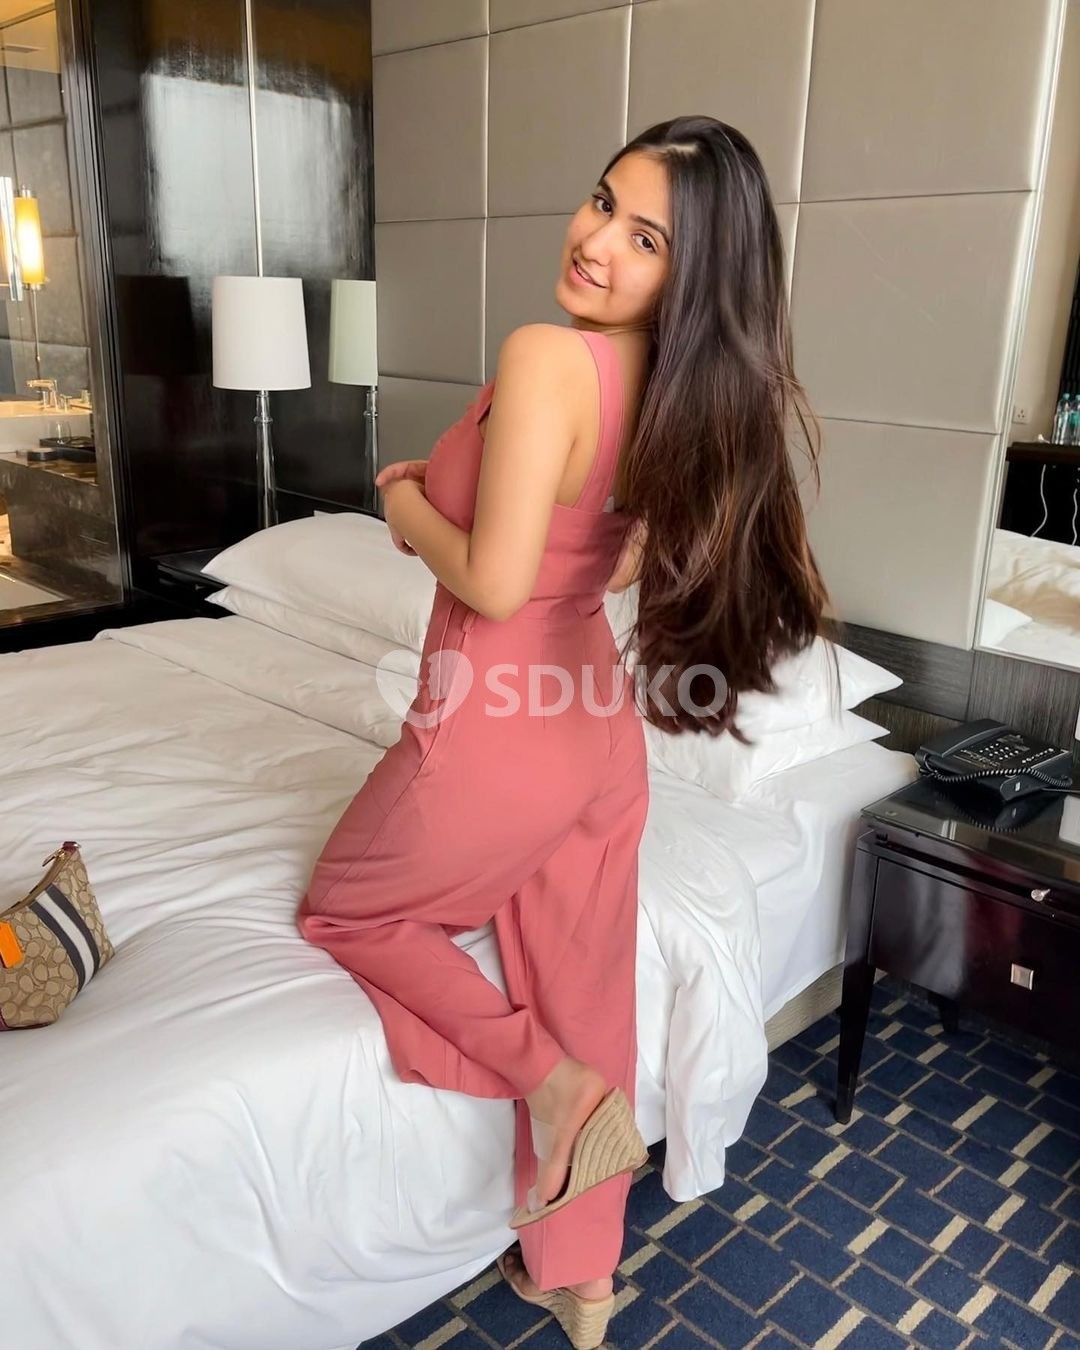 Thane🌟TODAY LOW-PRICE INDEPENDENT GIRLS 💯 SAFE SECURE SERVICE AVAILABLE IN LOW-PRICE AVAILABLE CALL ME